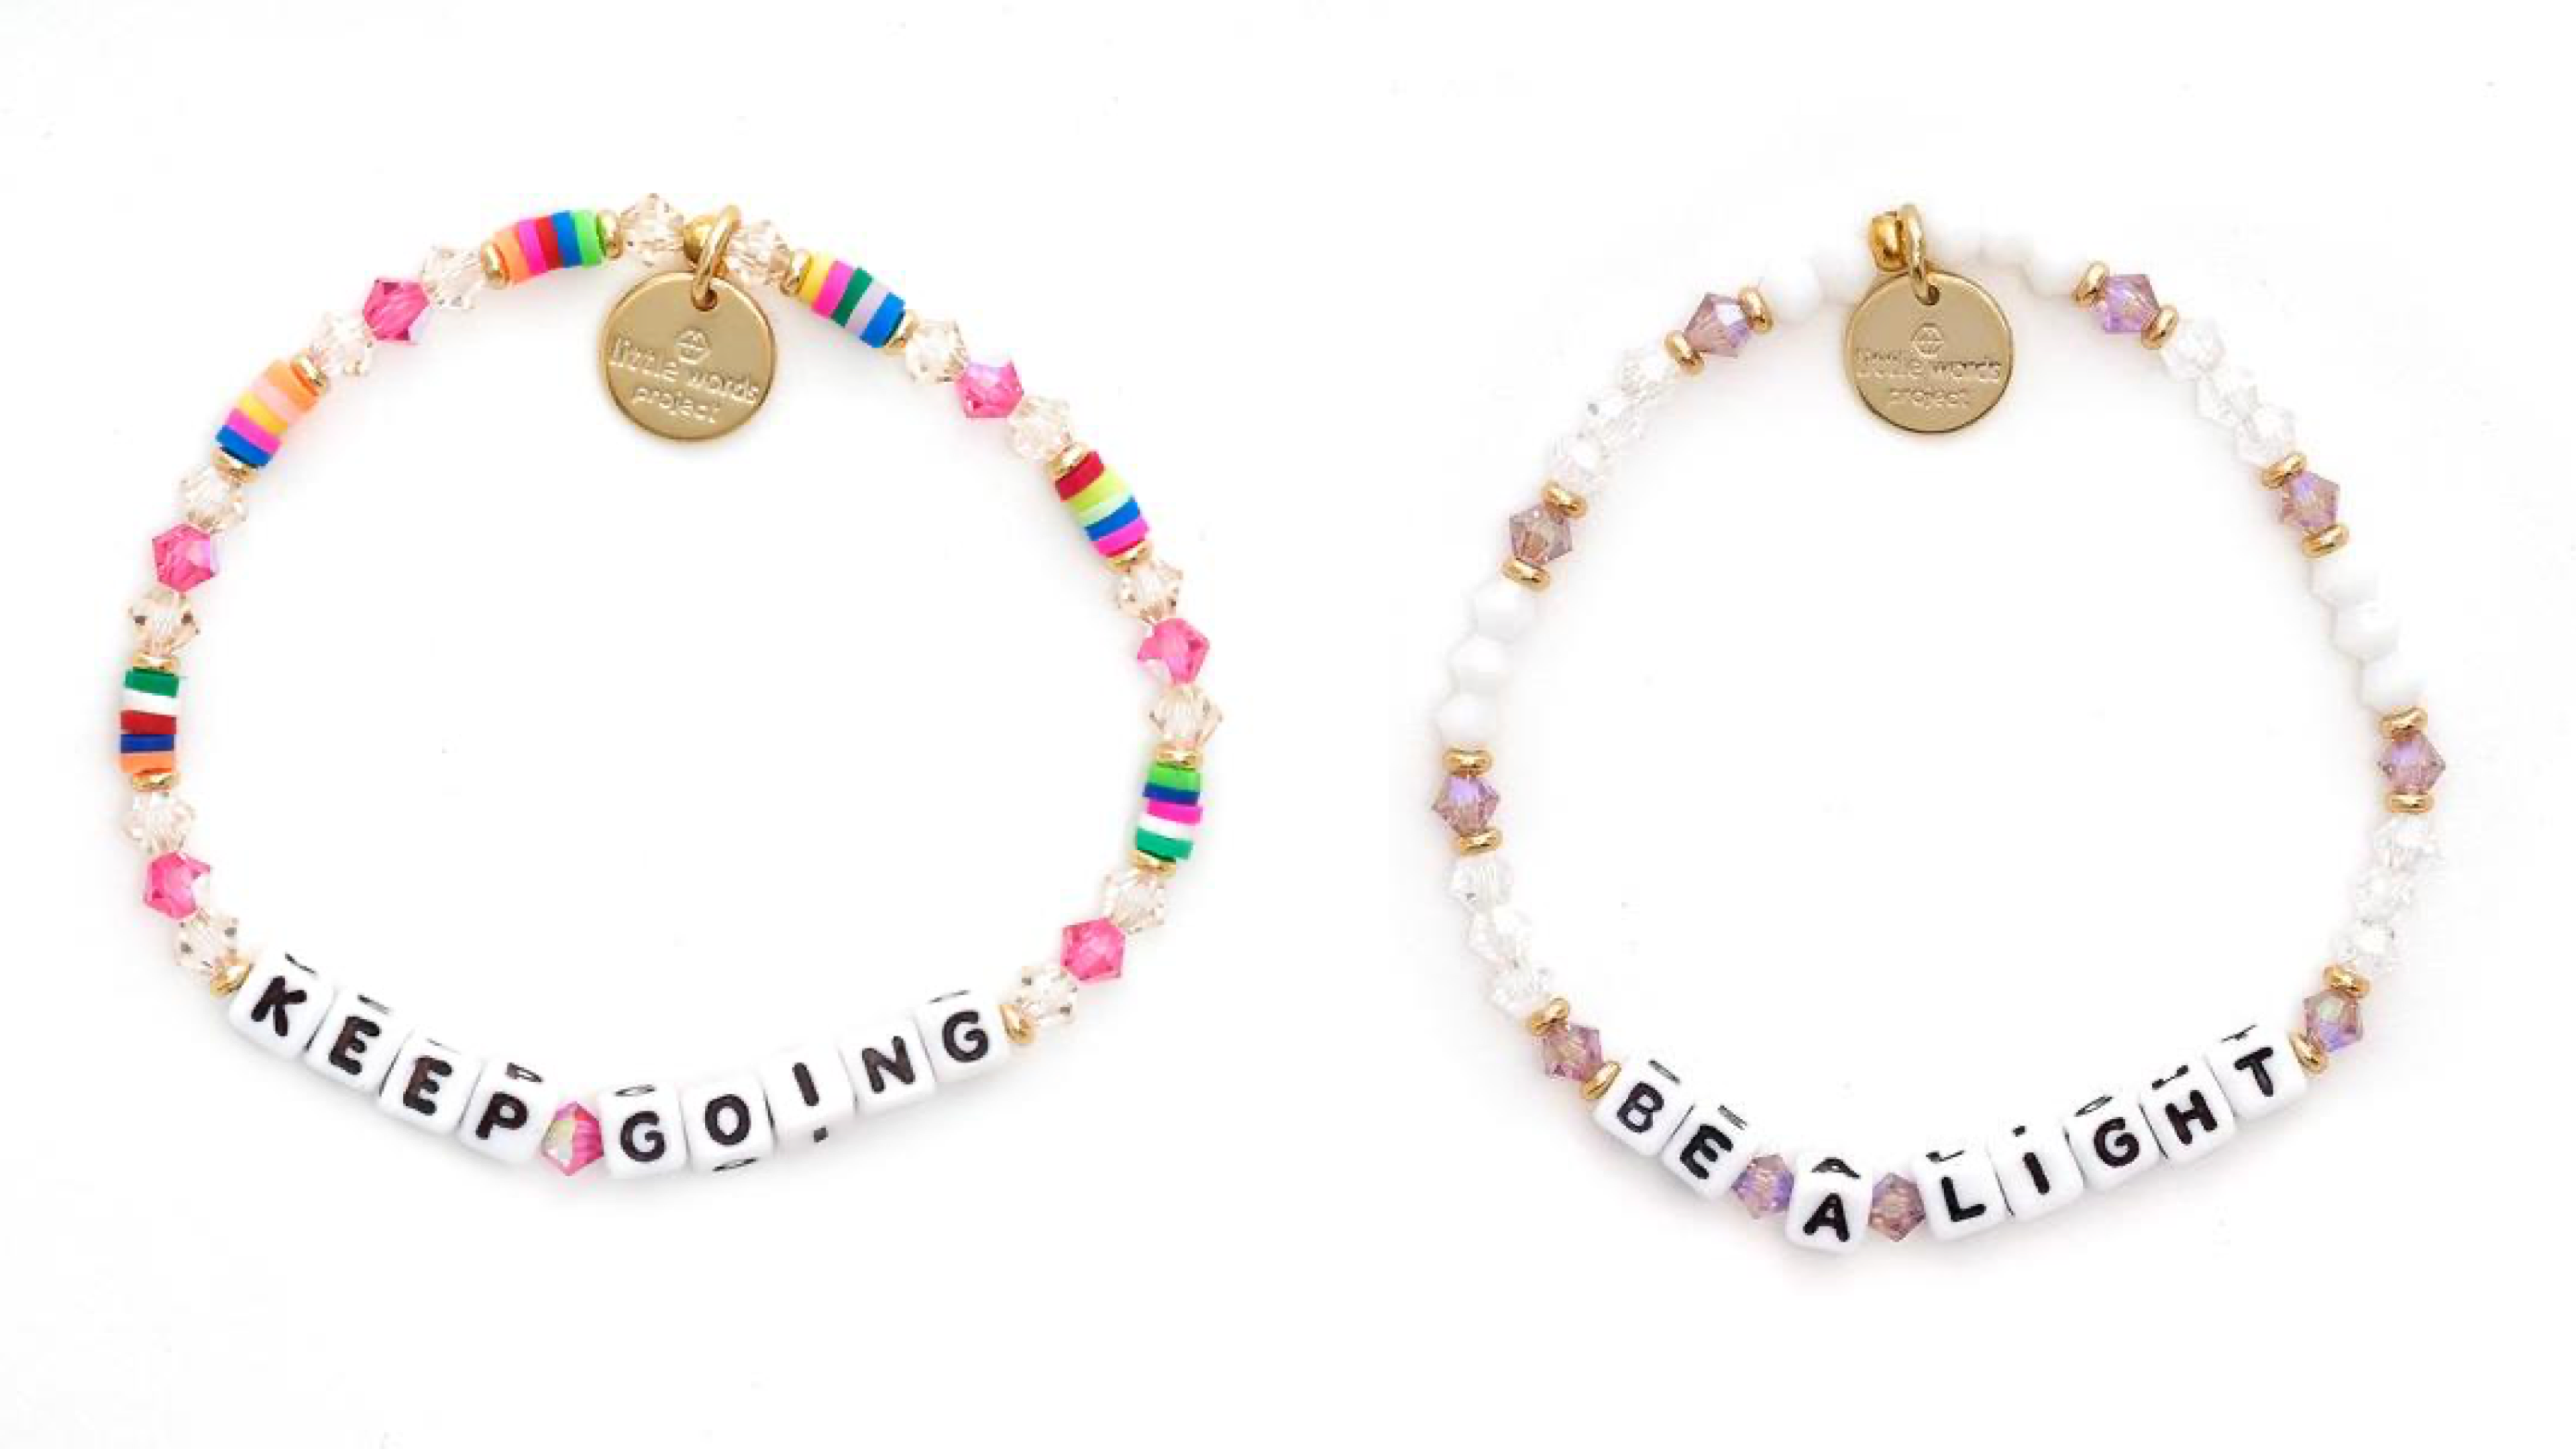 inspirational quote beaded bracelets with white beads and colored beads